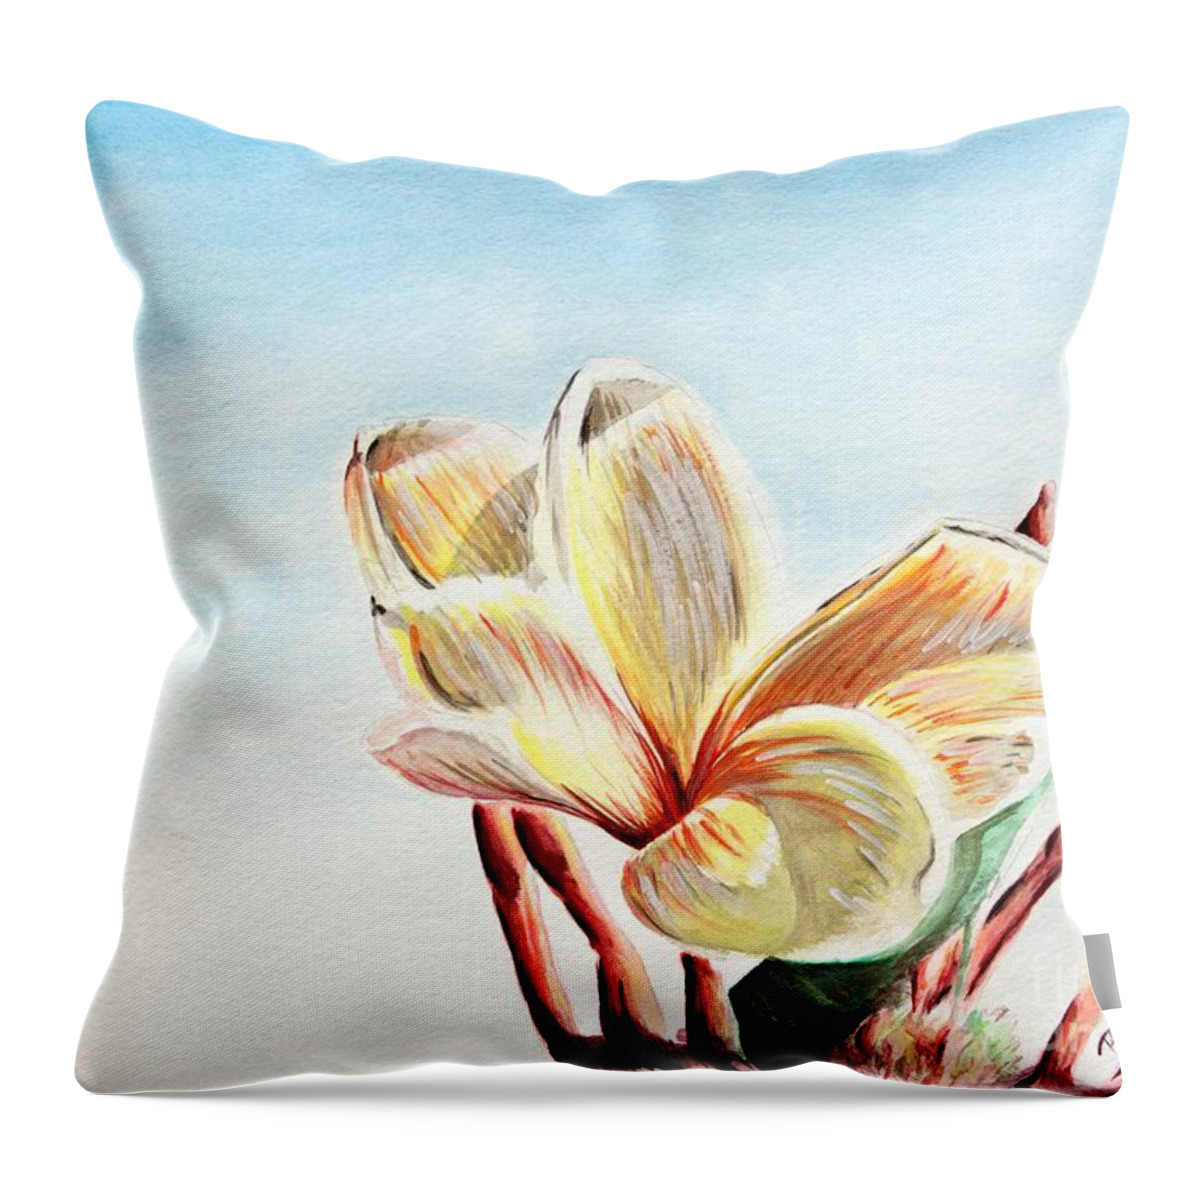 Watercolor Throw Pillow featuring the painting Laguna Flower by Katharina Bruenen